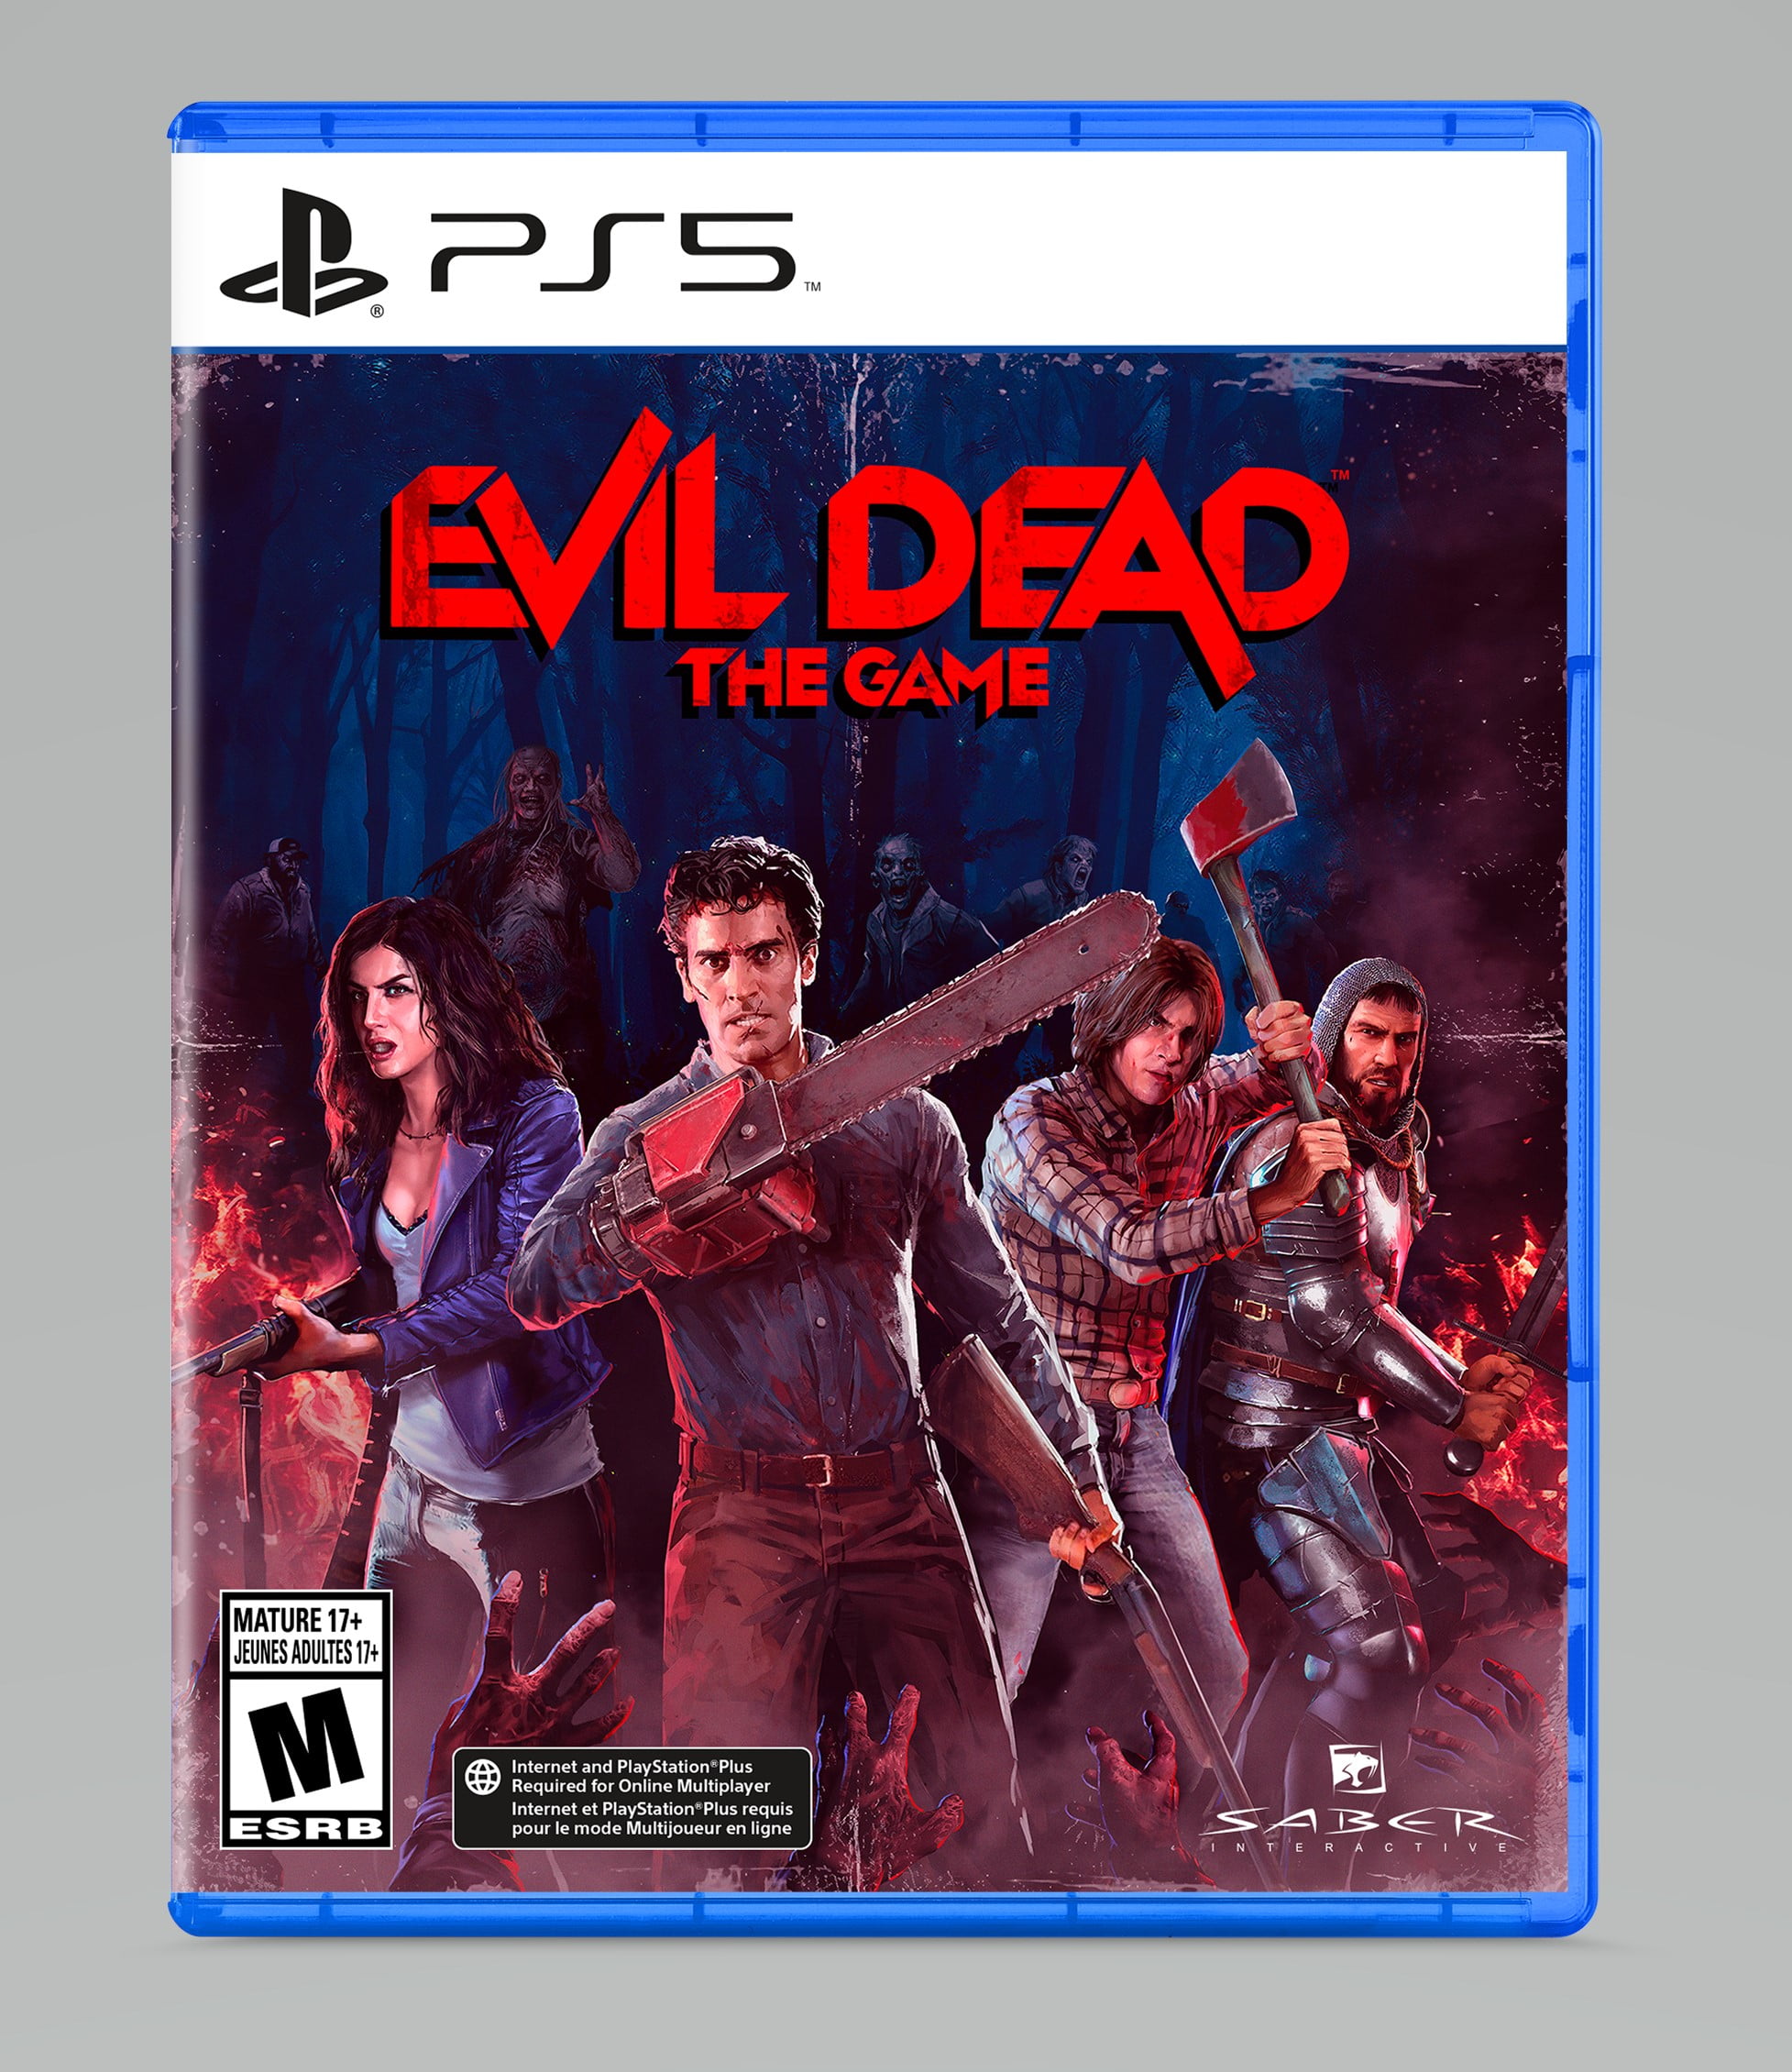 Evil Dead The Game Update 1.07 Frights Out for Improvements This June 28